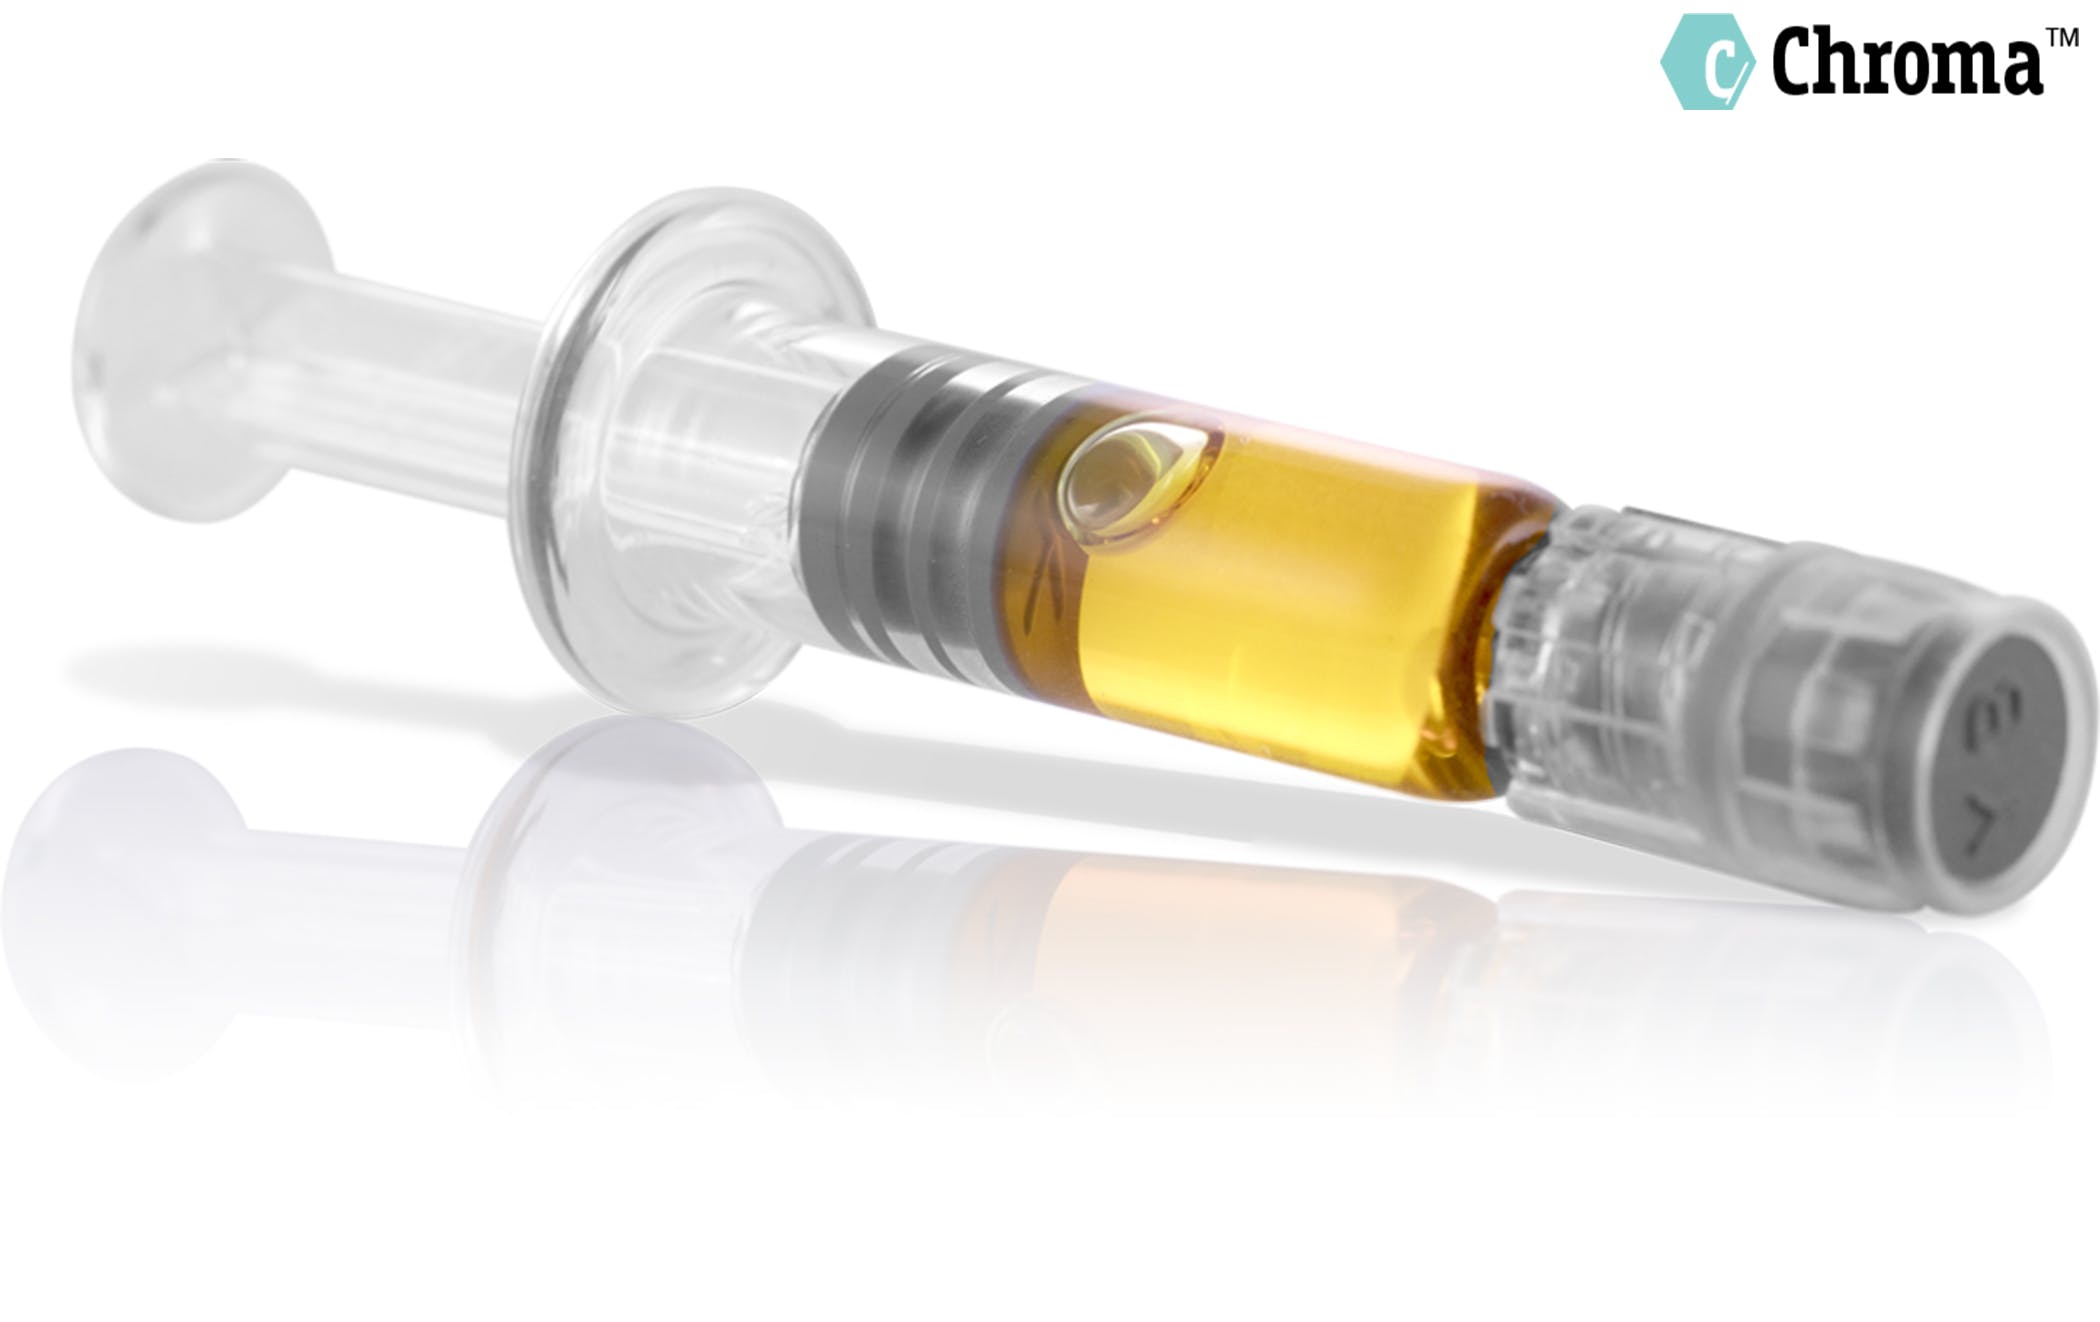 concentrate-rec-con-evolab-vape-refill-syringe-1000-mg